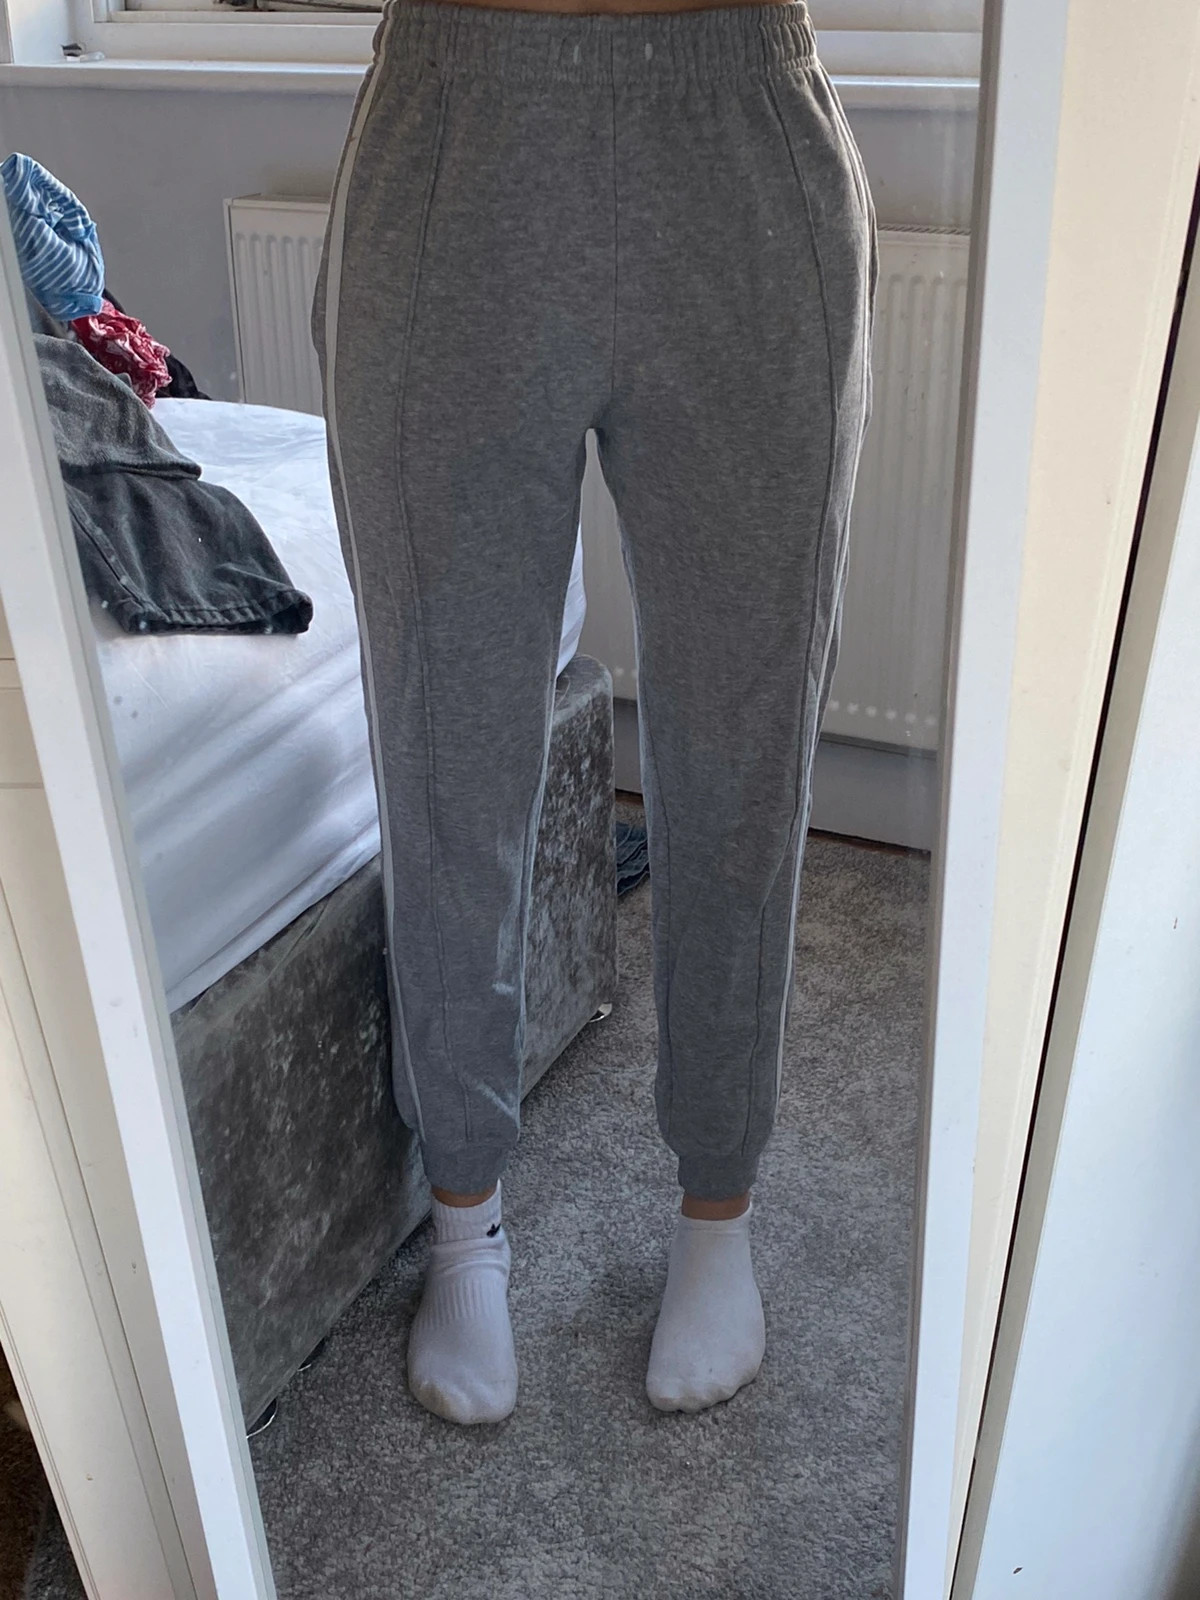 PLT Ash Grey Embroidered Joggers, Trousers